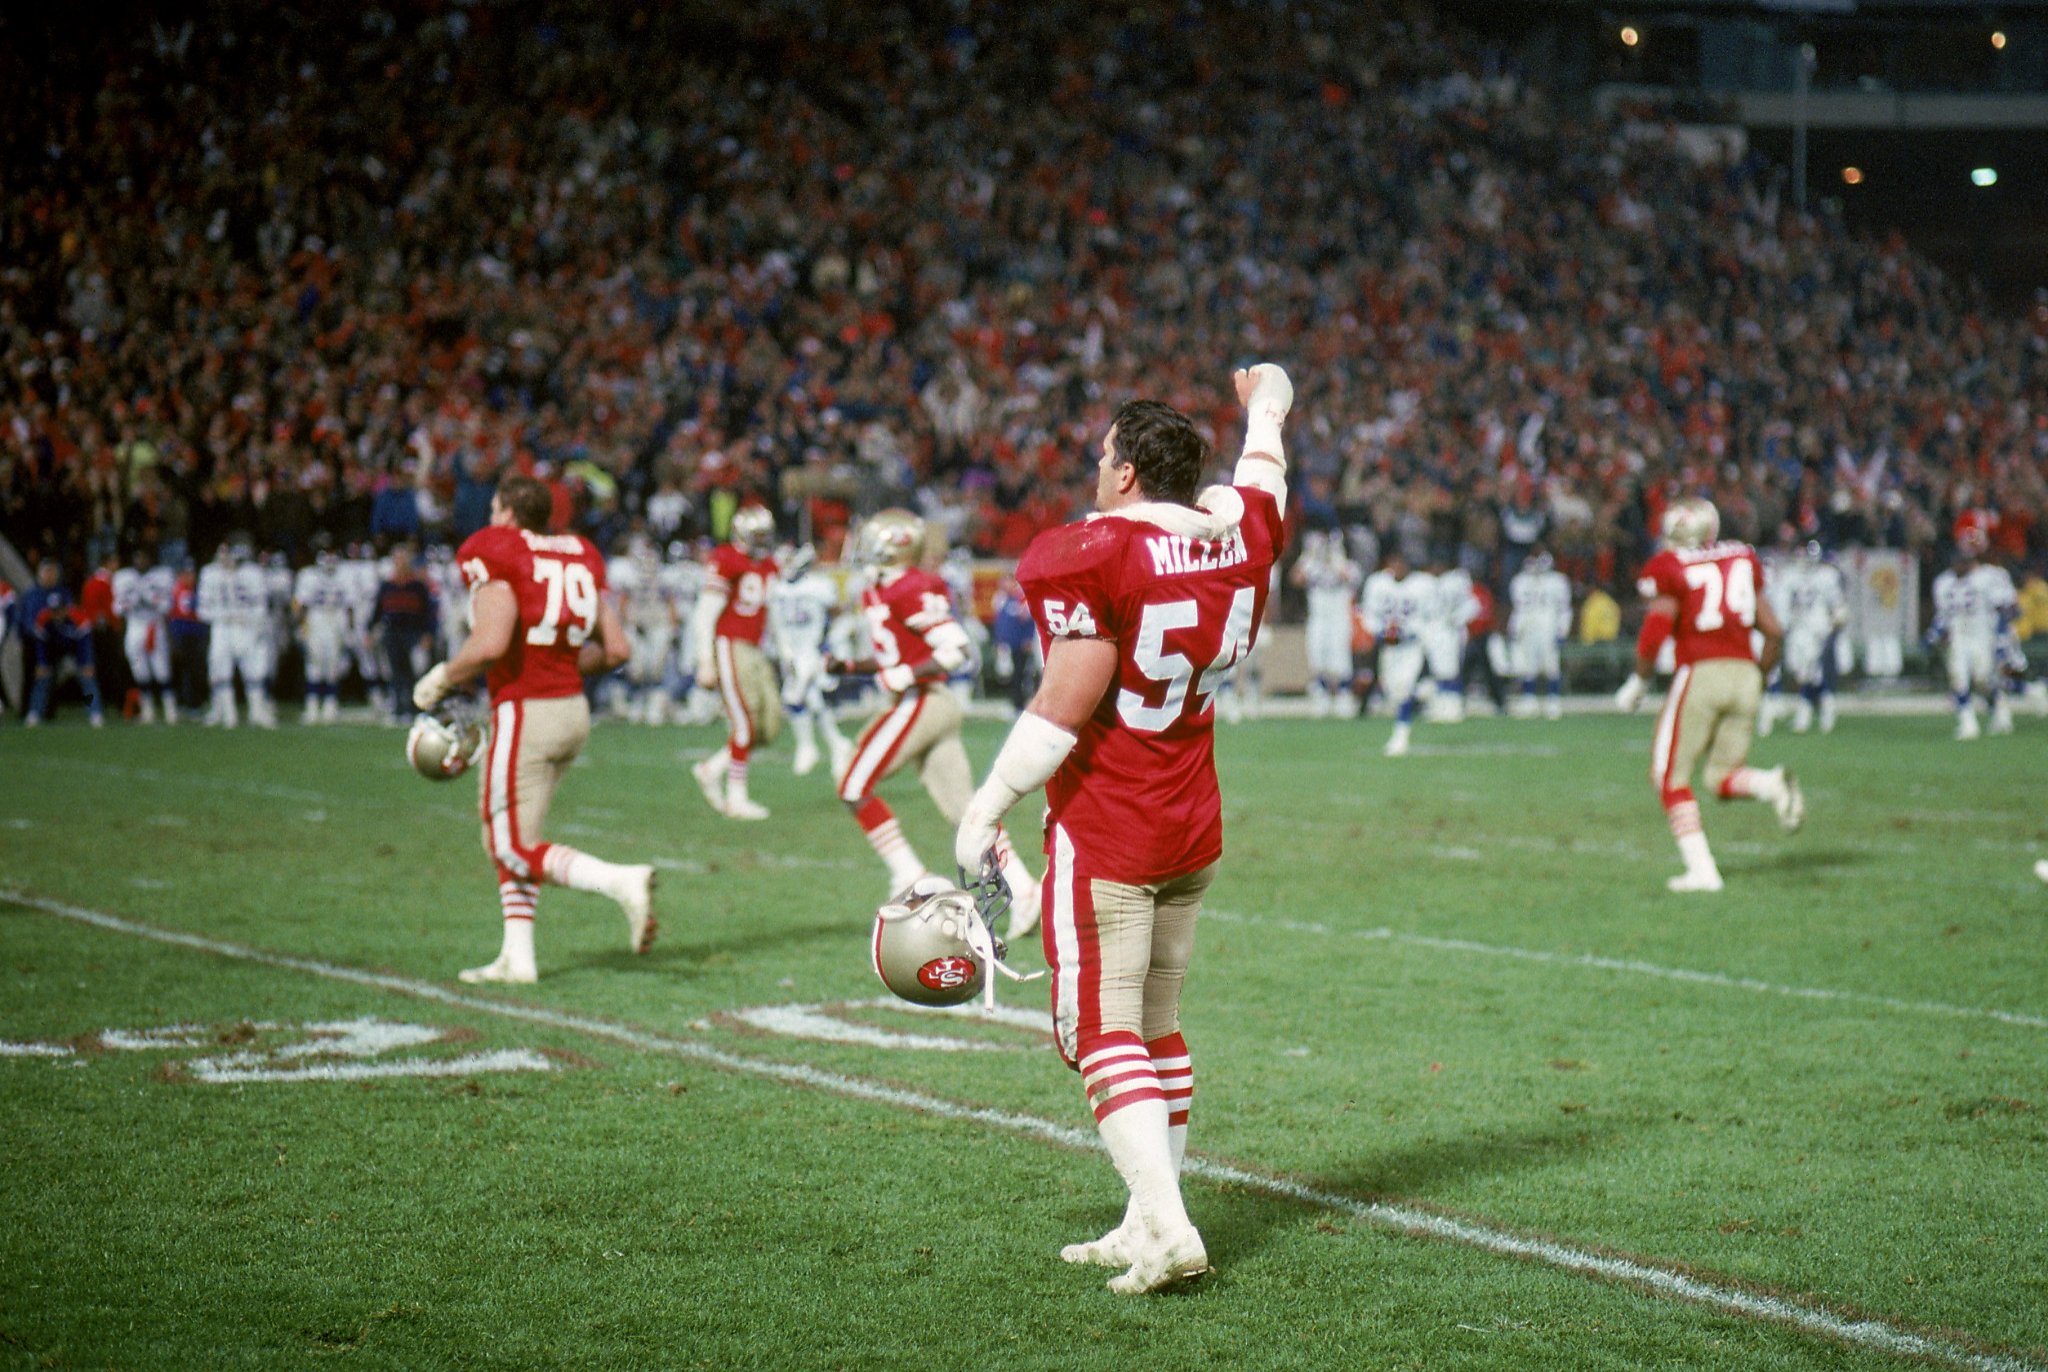 1990 'Monday Night Football' game in 49ers-Giants rivalry didn't